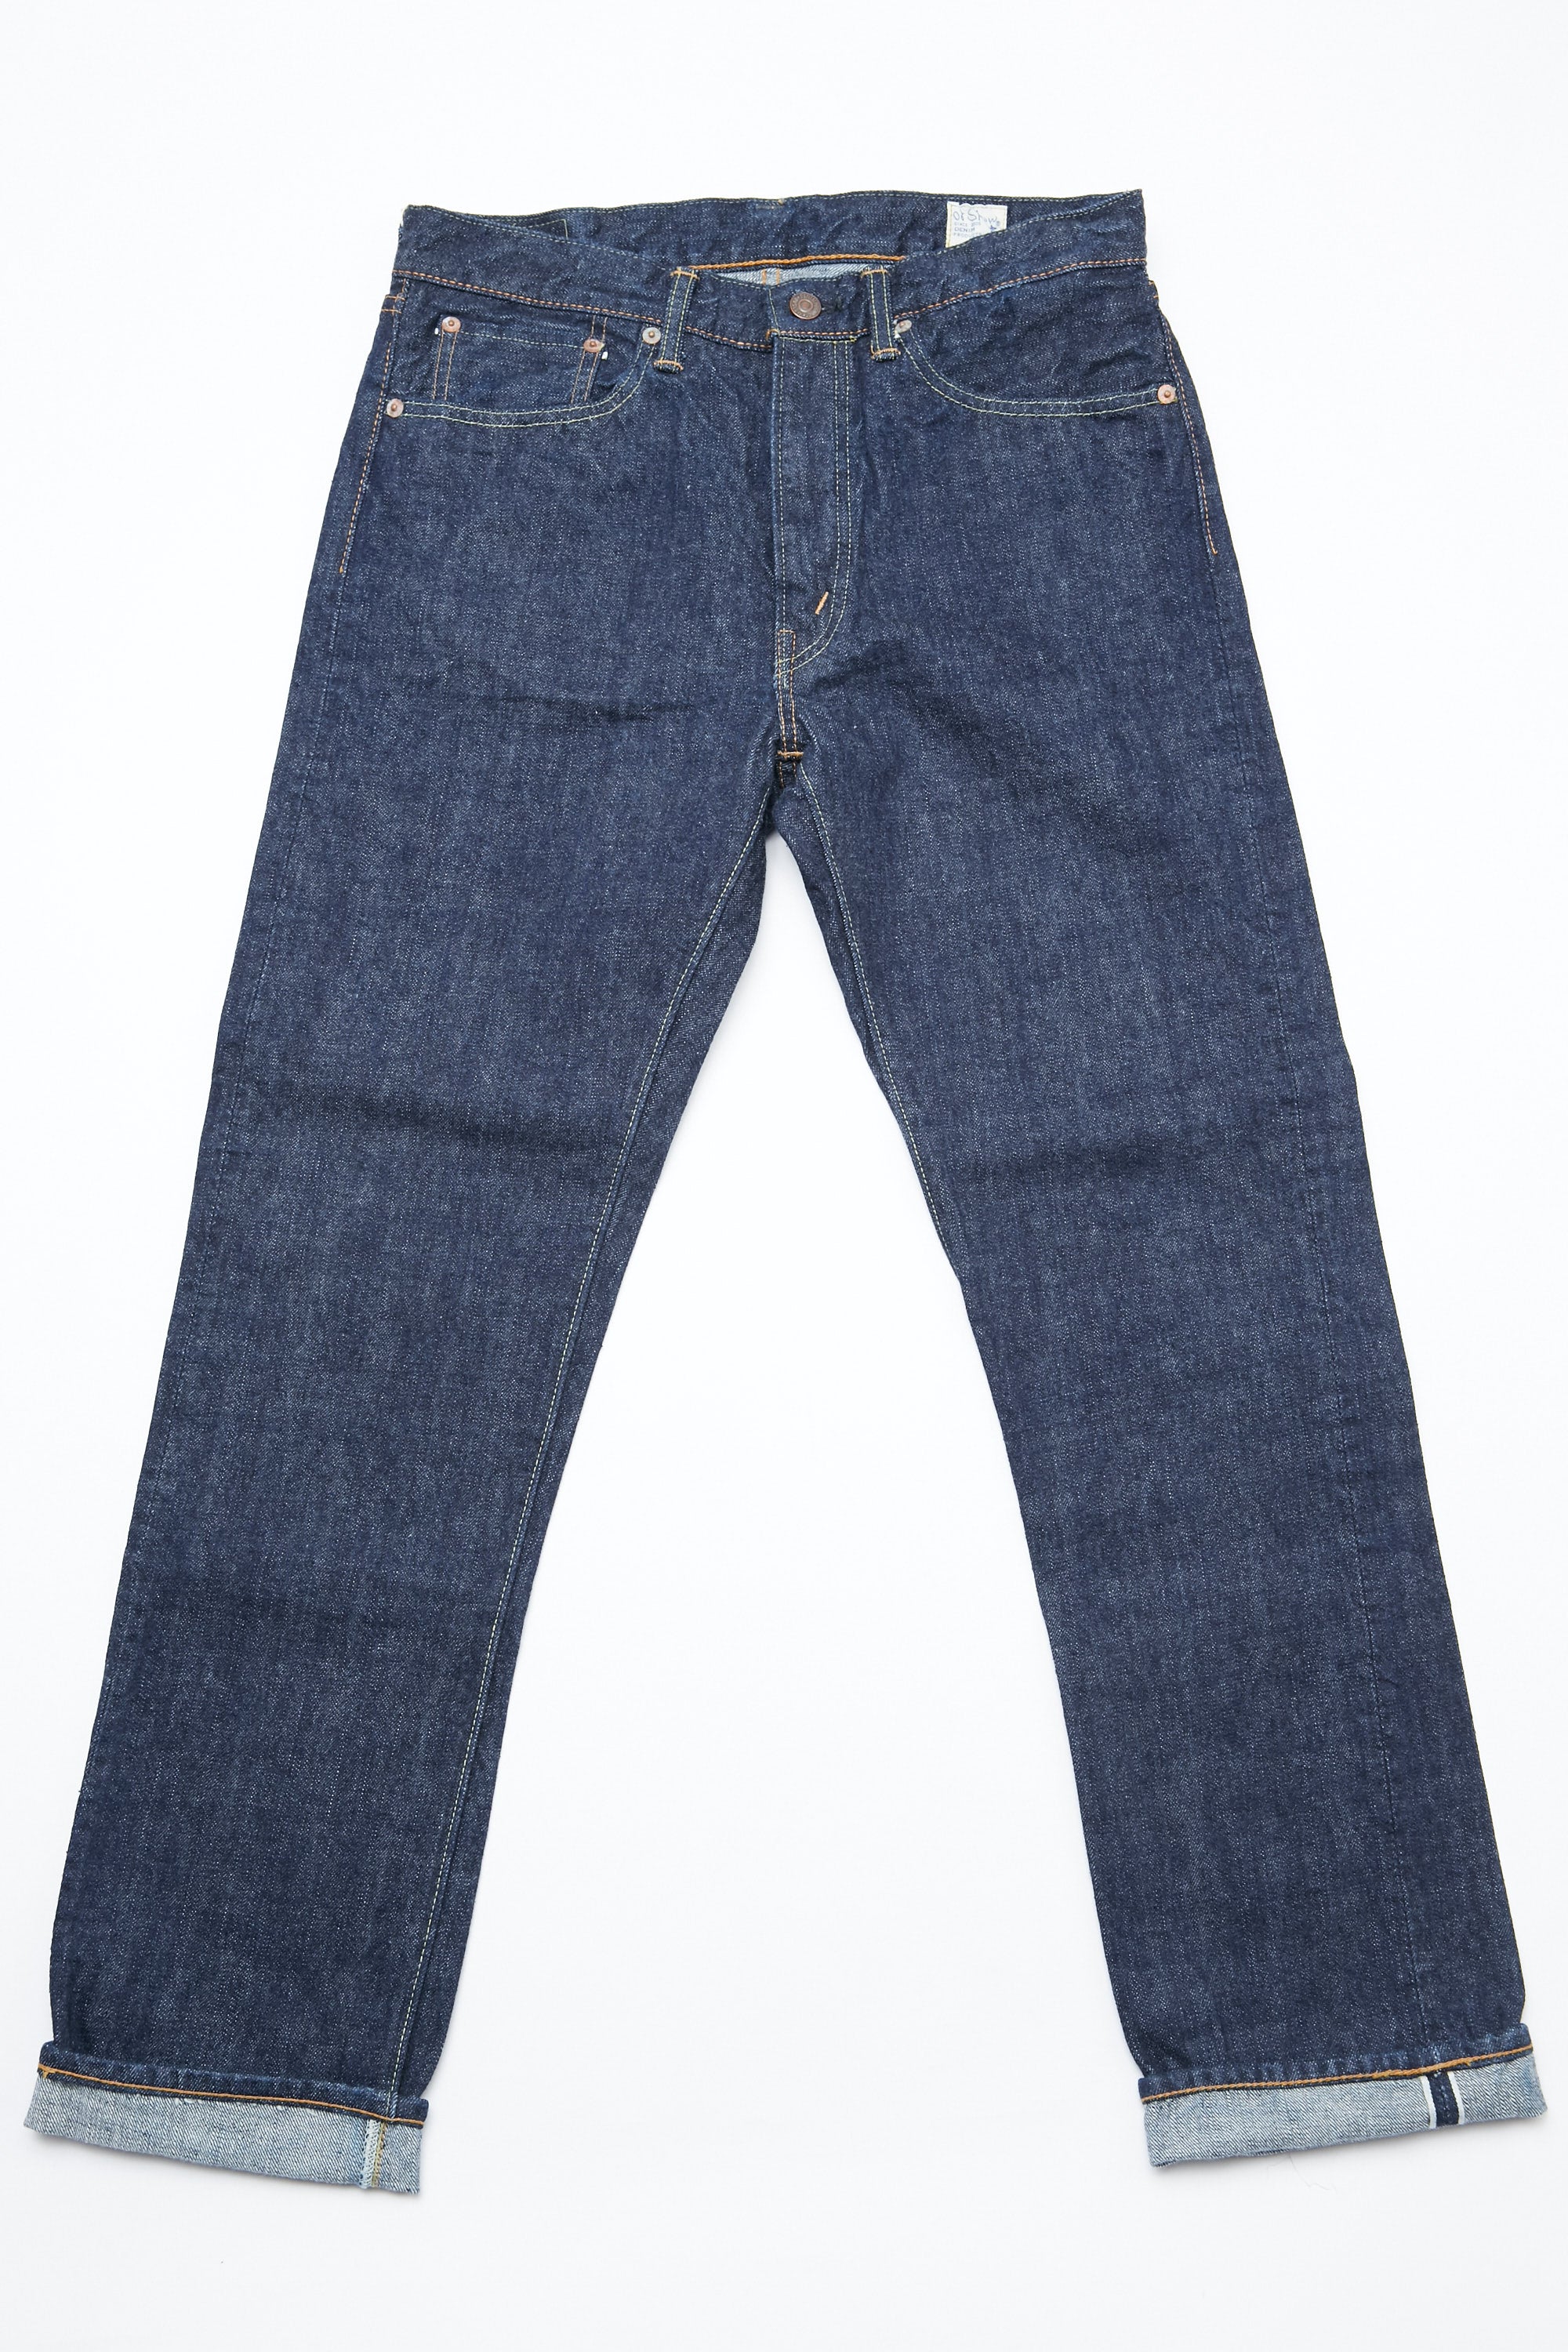 orSlow 107 Ivy Slim Jean - One – Totem Brand Co.